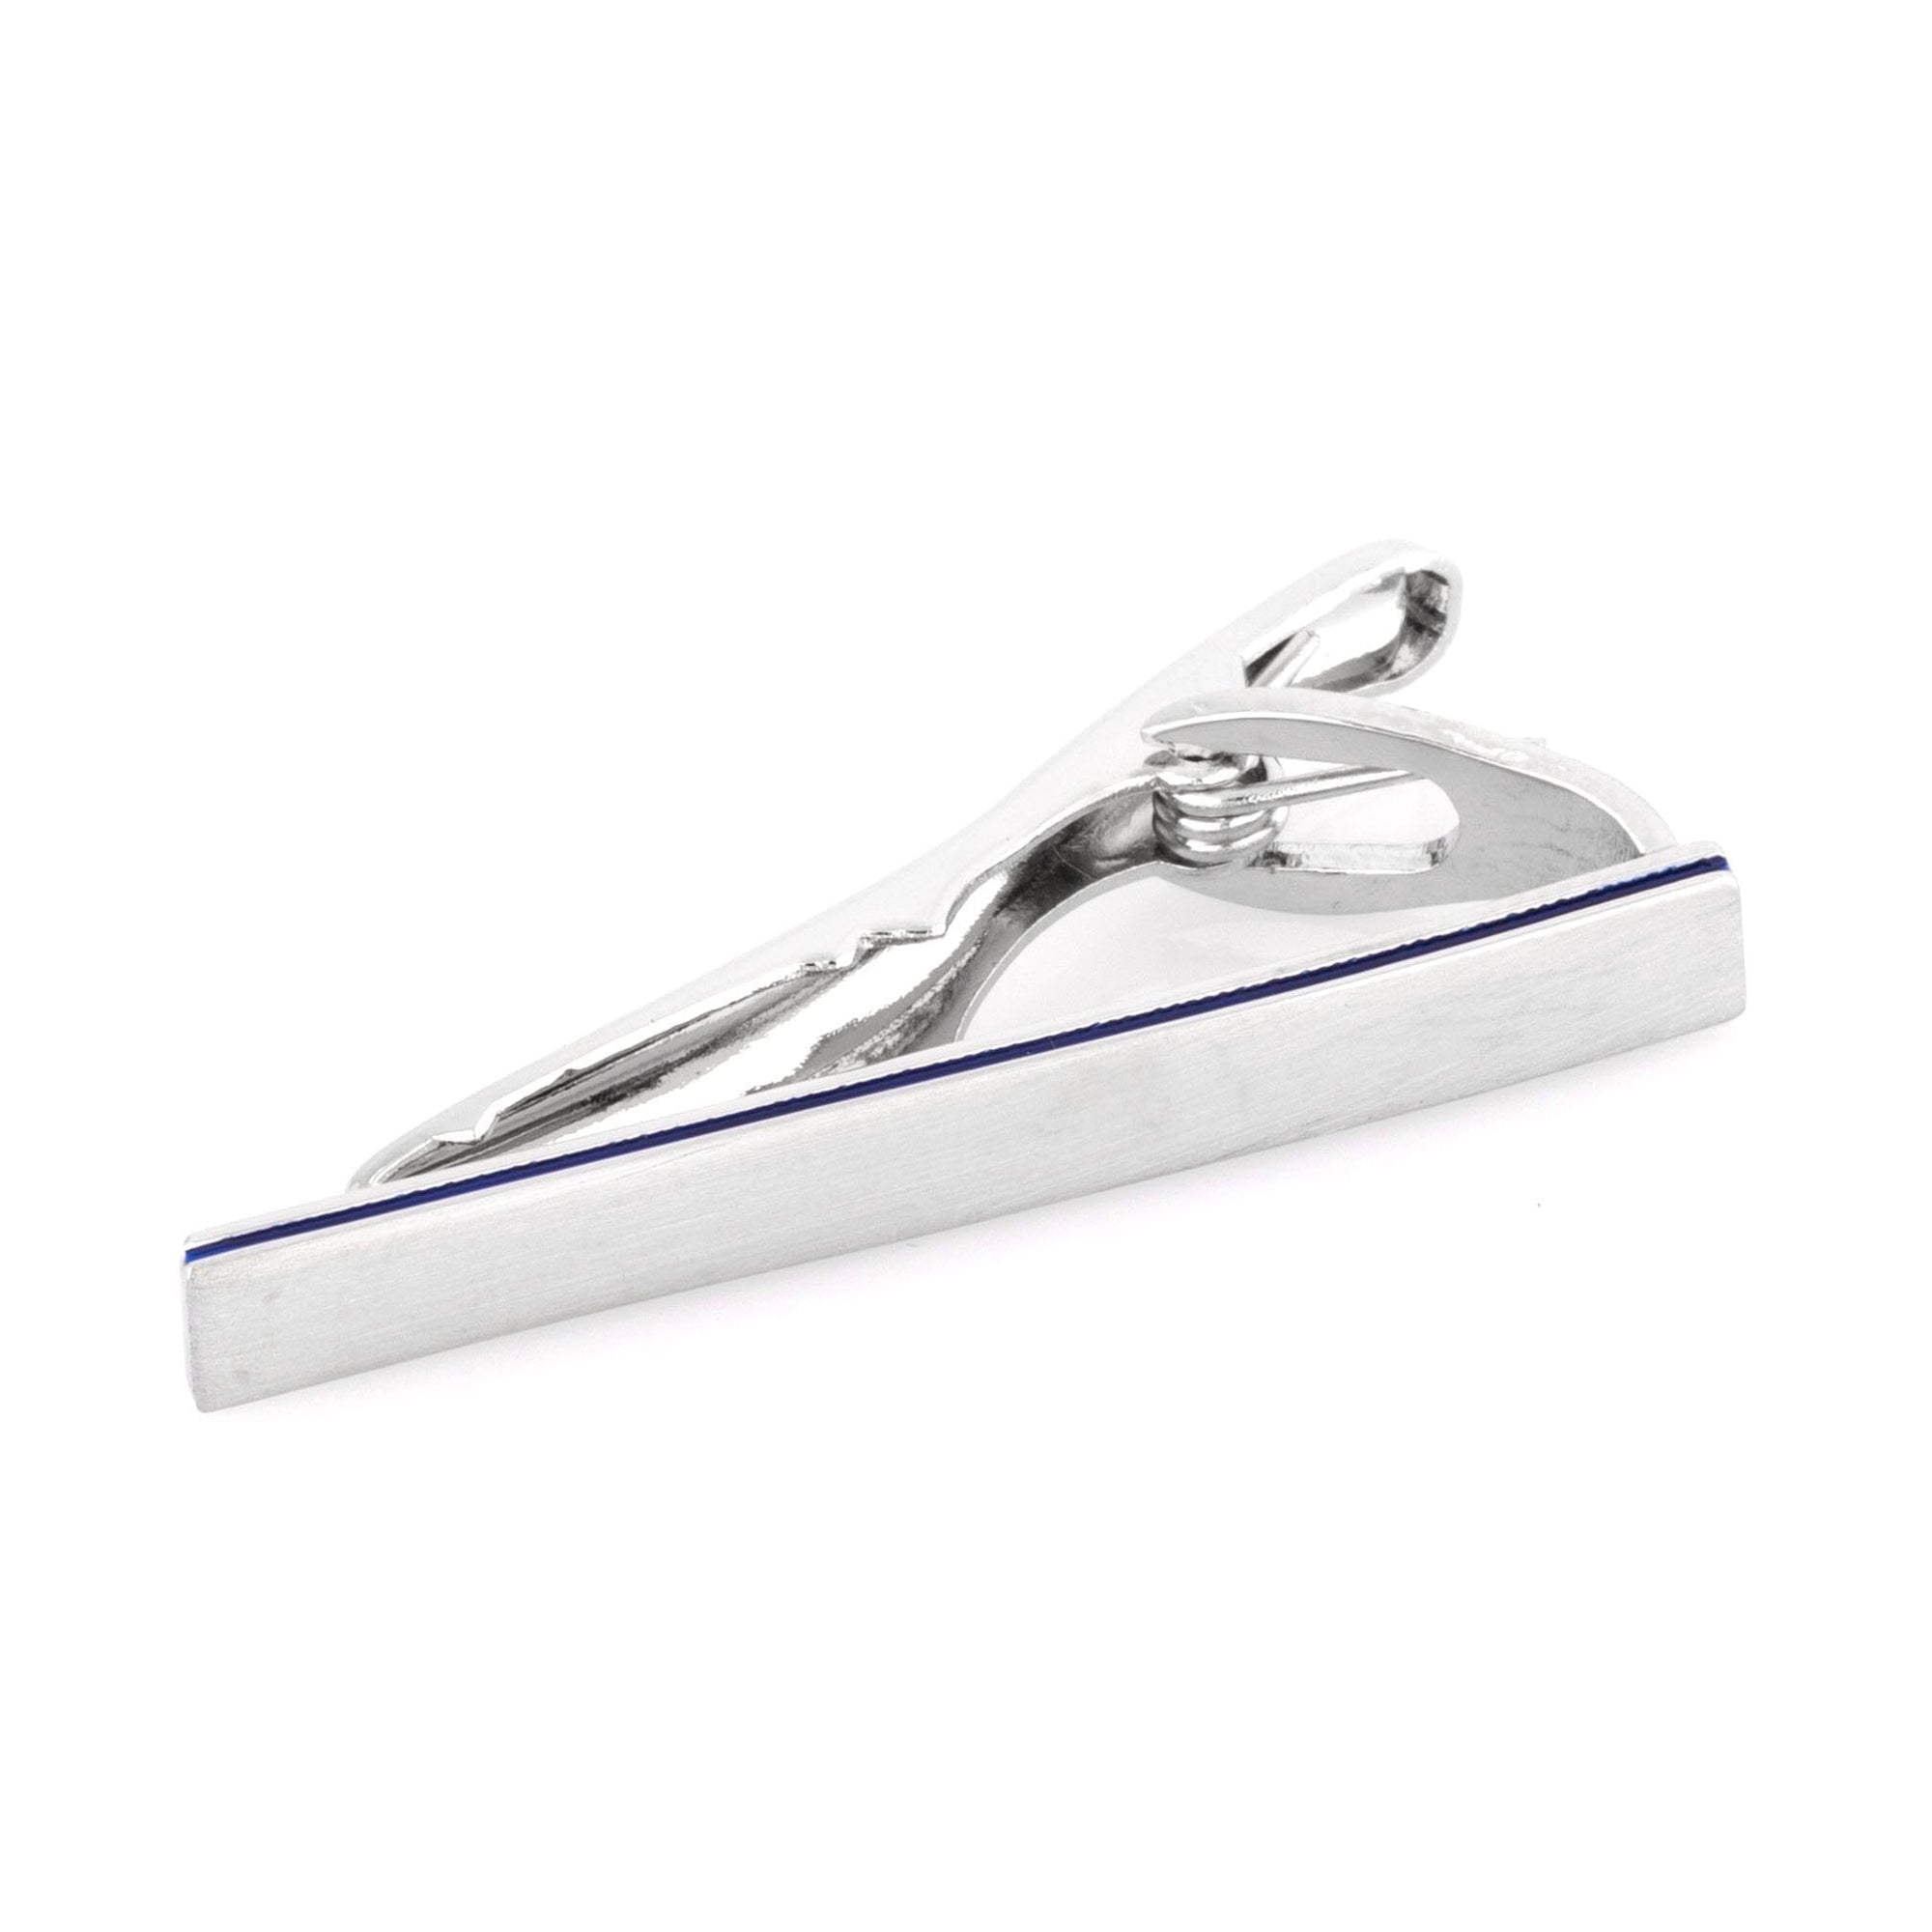 Brushed Silver with Dark Blue Edge Small Tie Clip Tie Clips Clinks Australia Brushed Silver with Dark Blue Edge Small Tie Clip 